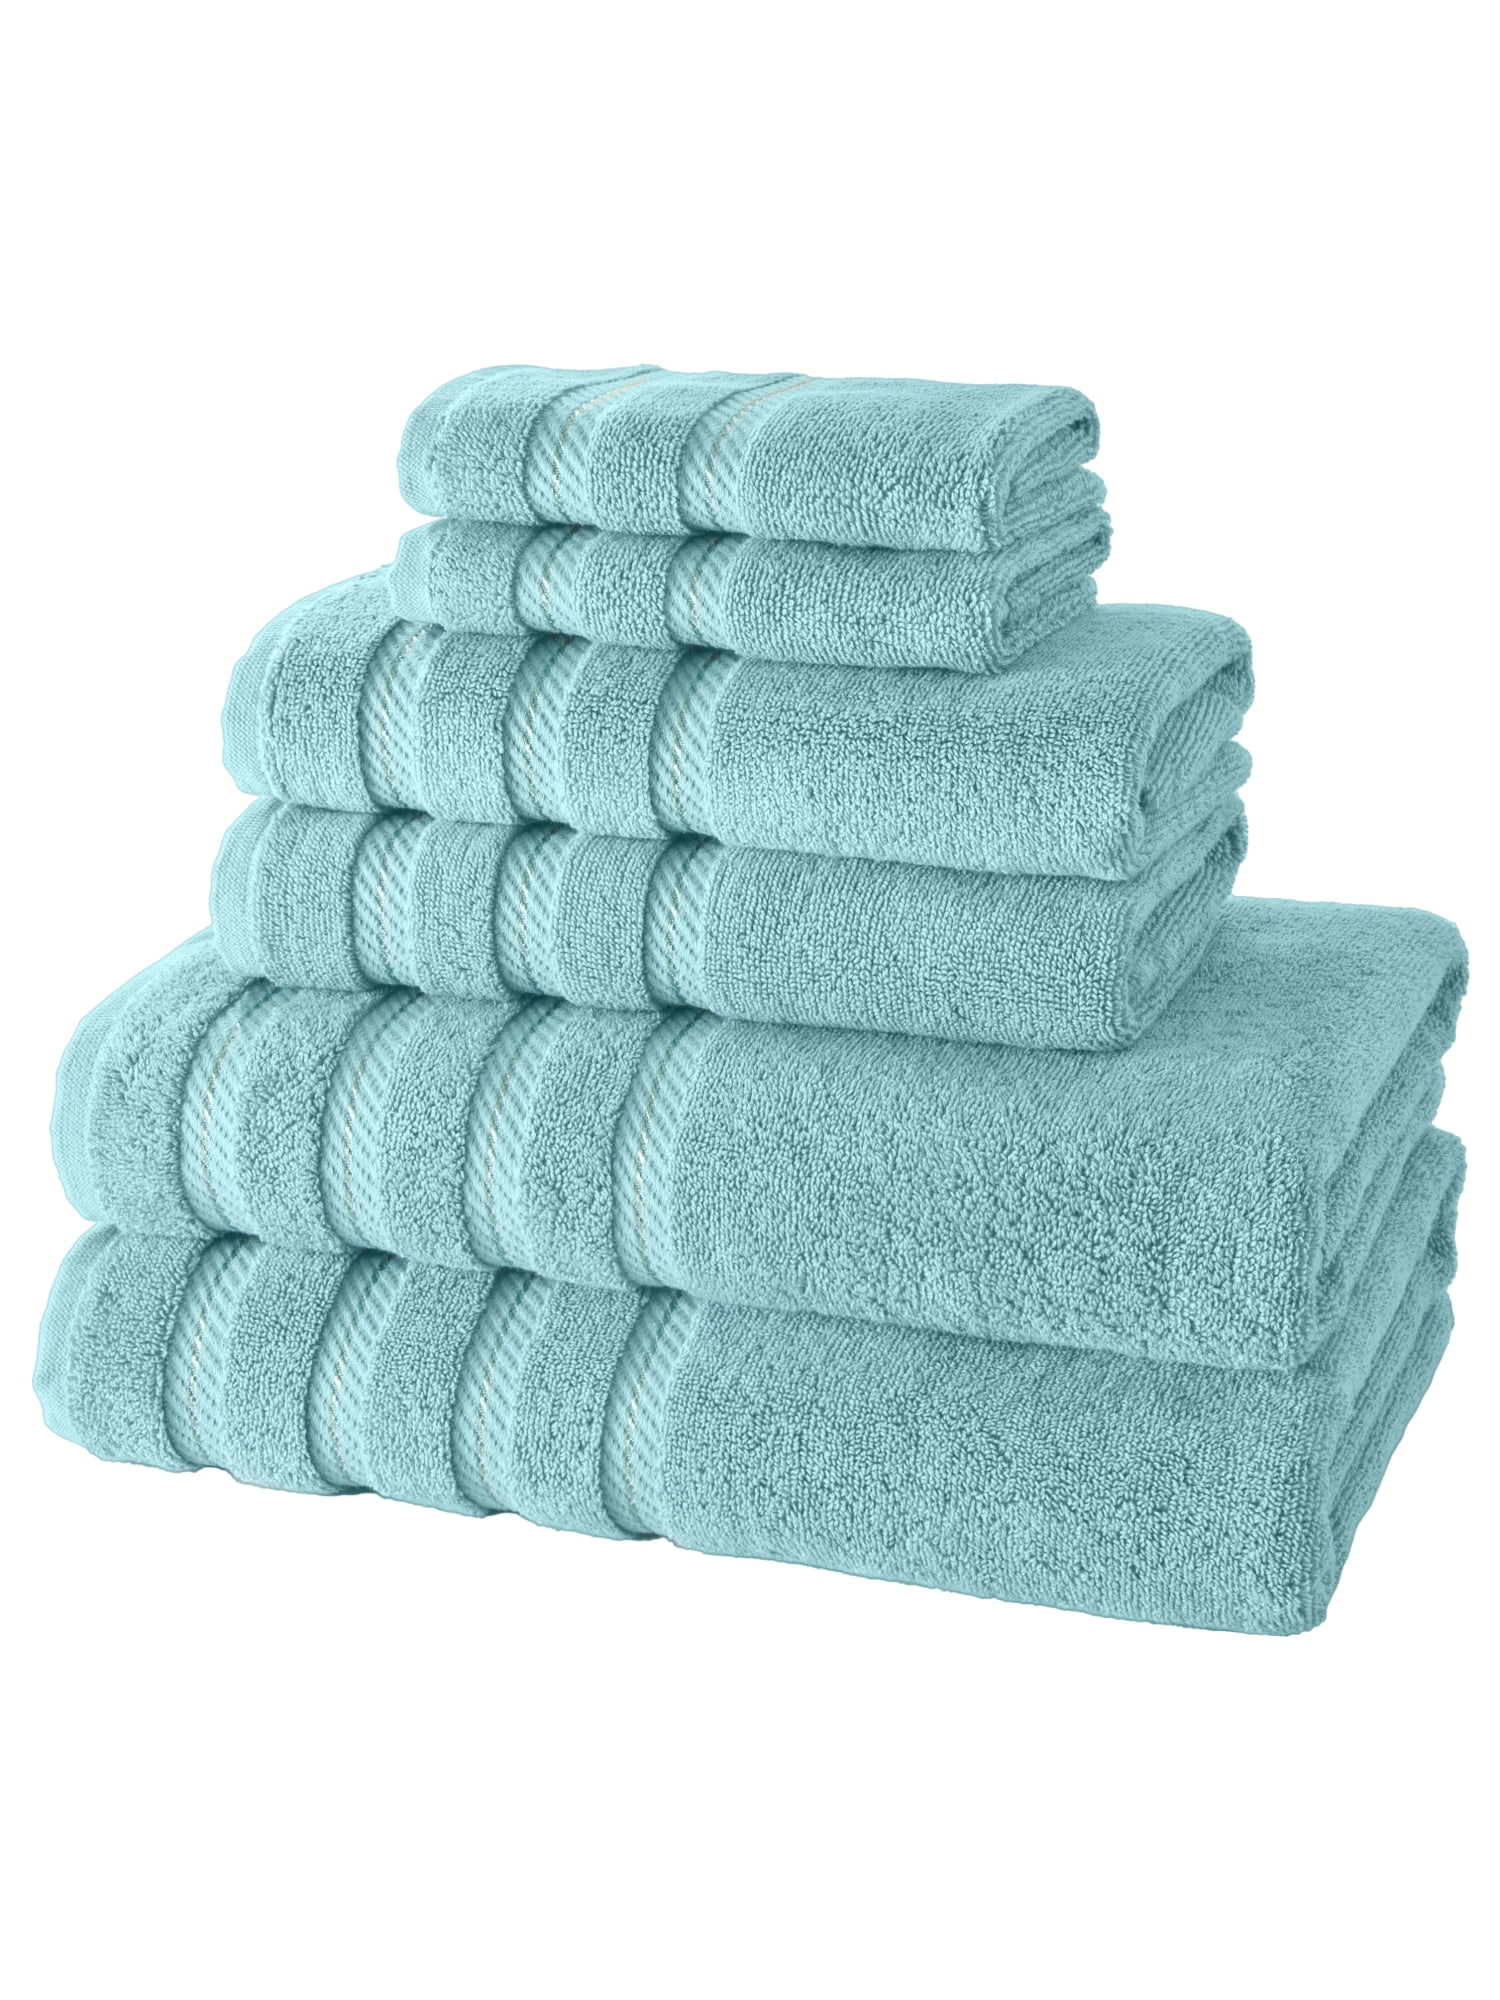 Wealuxe Cotton Bath Towels - Soft and Absorbent Hotel Towel - 27x52 Inch -  4 Pack - Smoke Grey